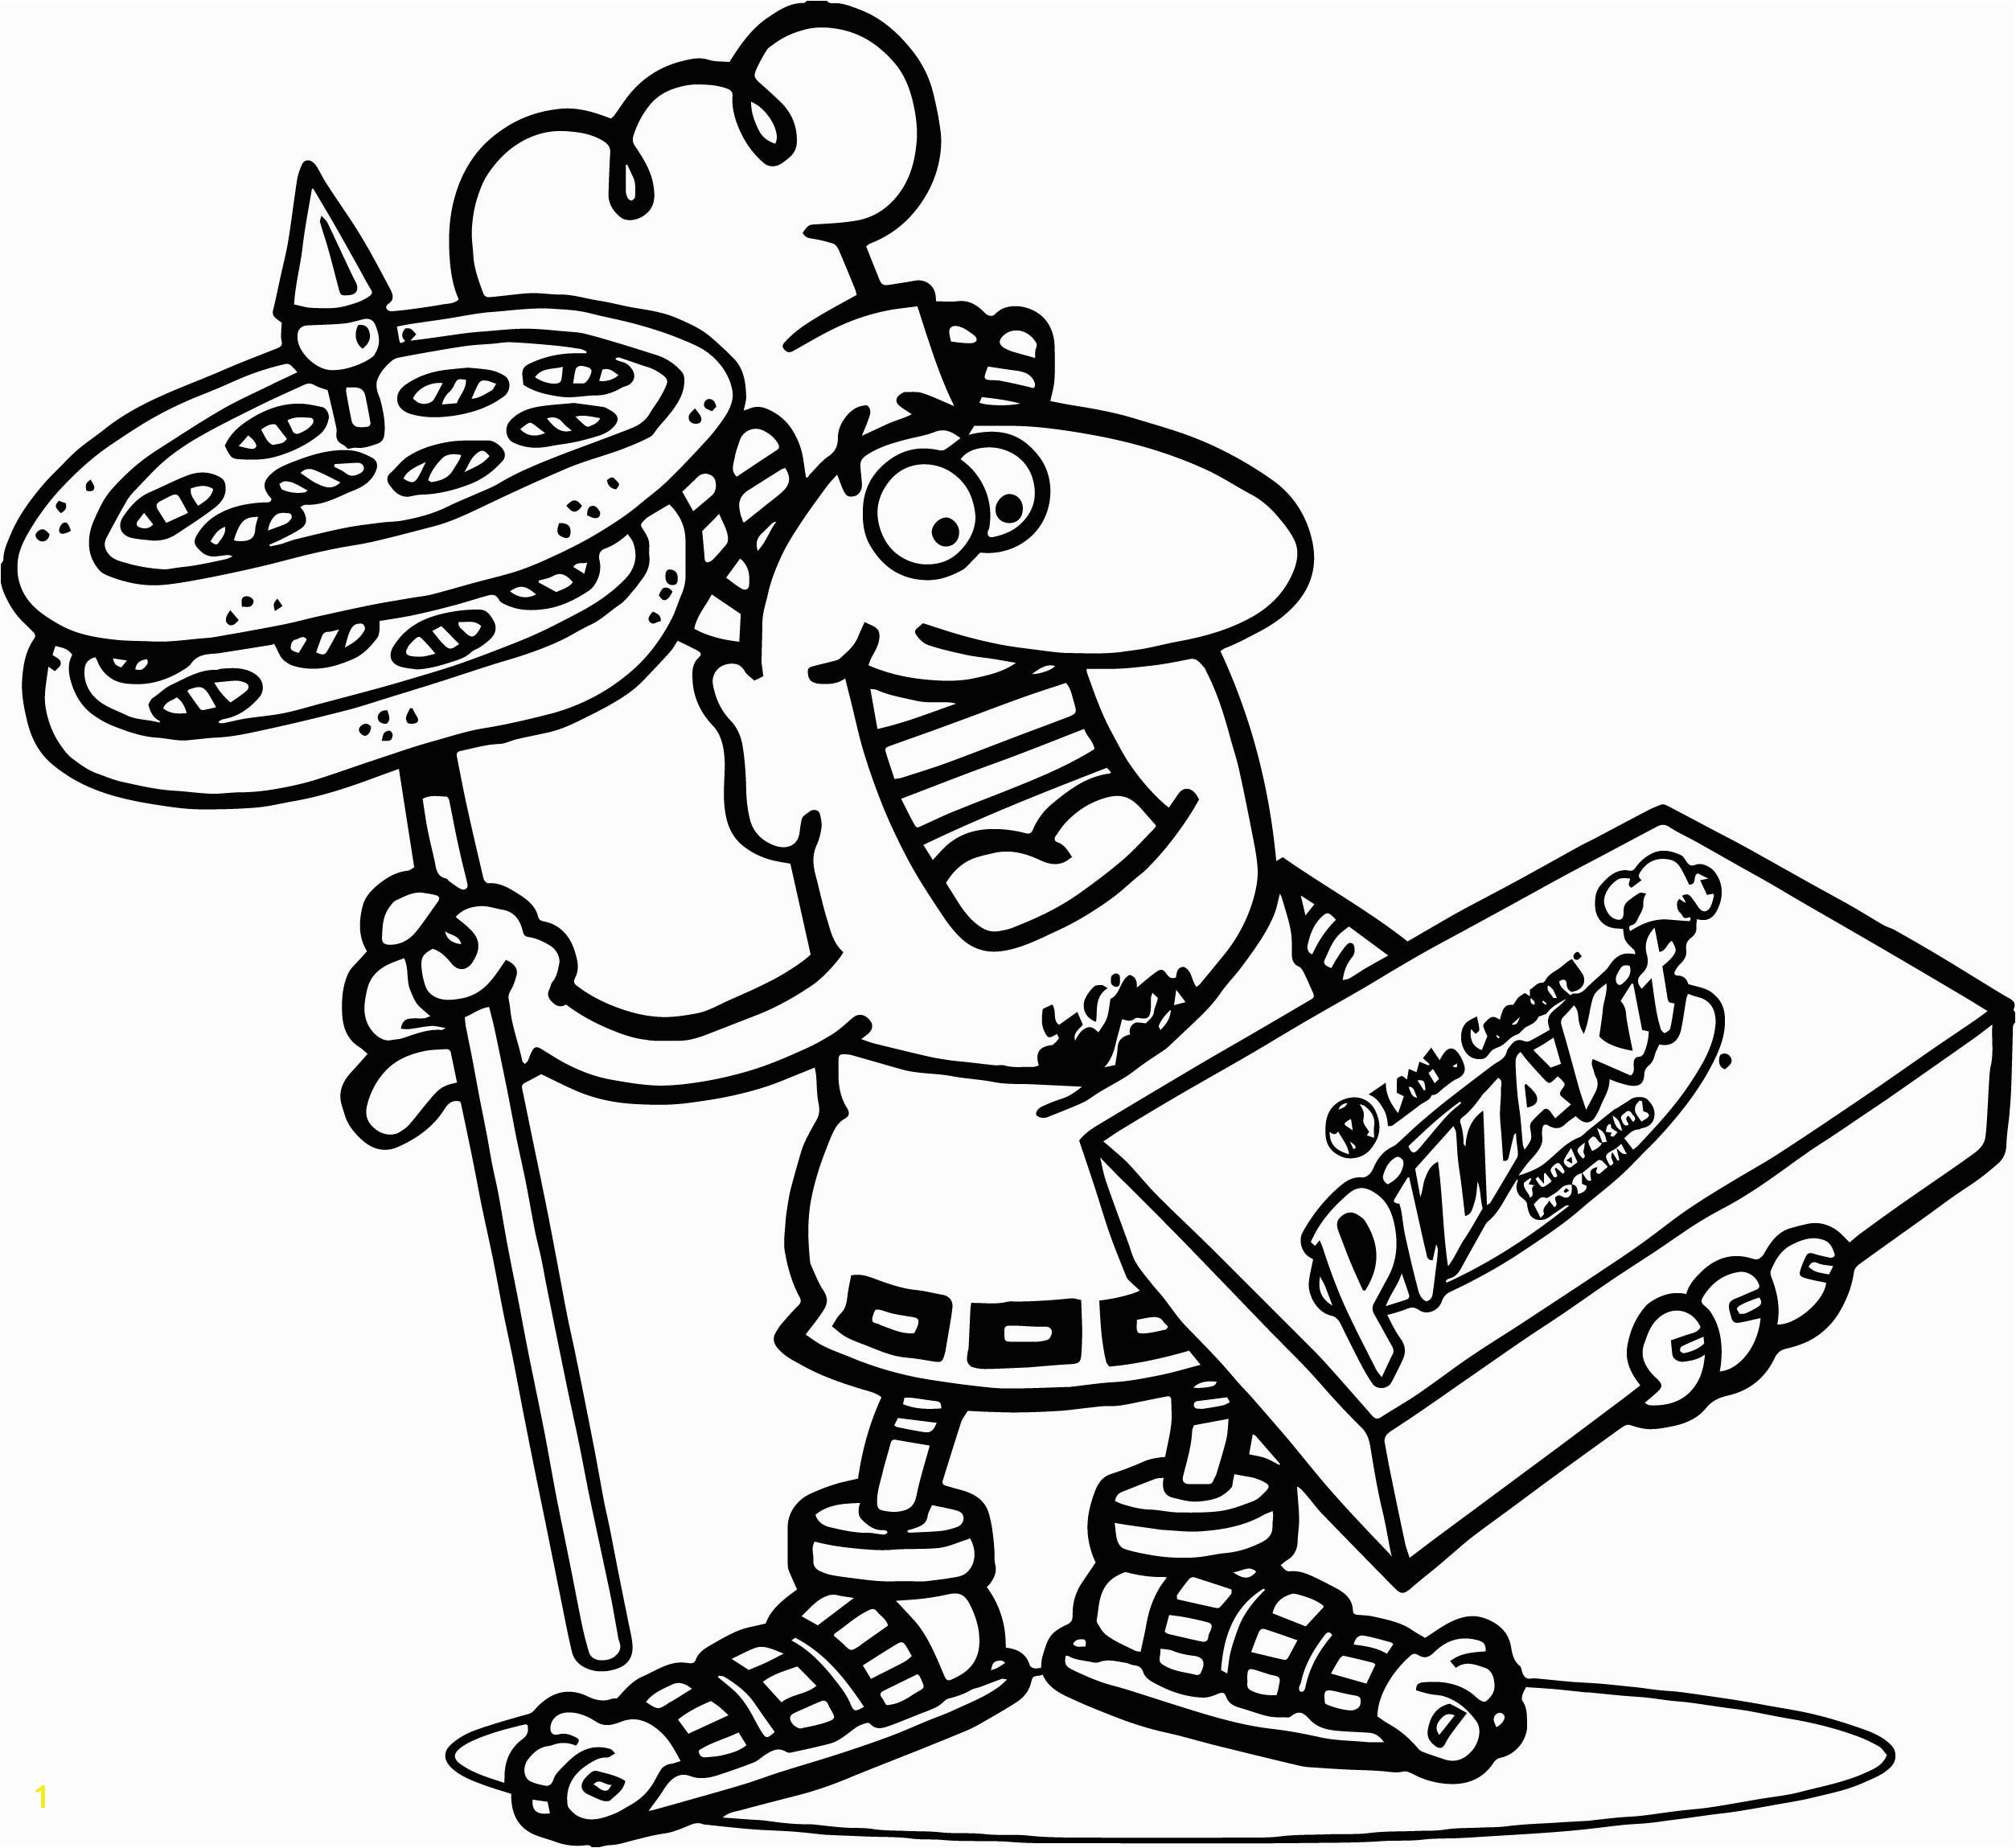 Little Caesars Coloring Pages Luxury Liberal Boston Bruins Hockey Coloring Pages 12 Edmonton Oilers at